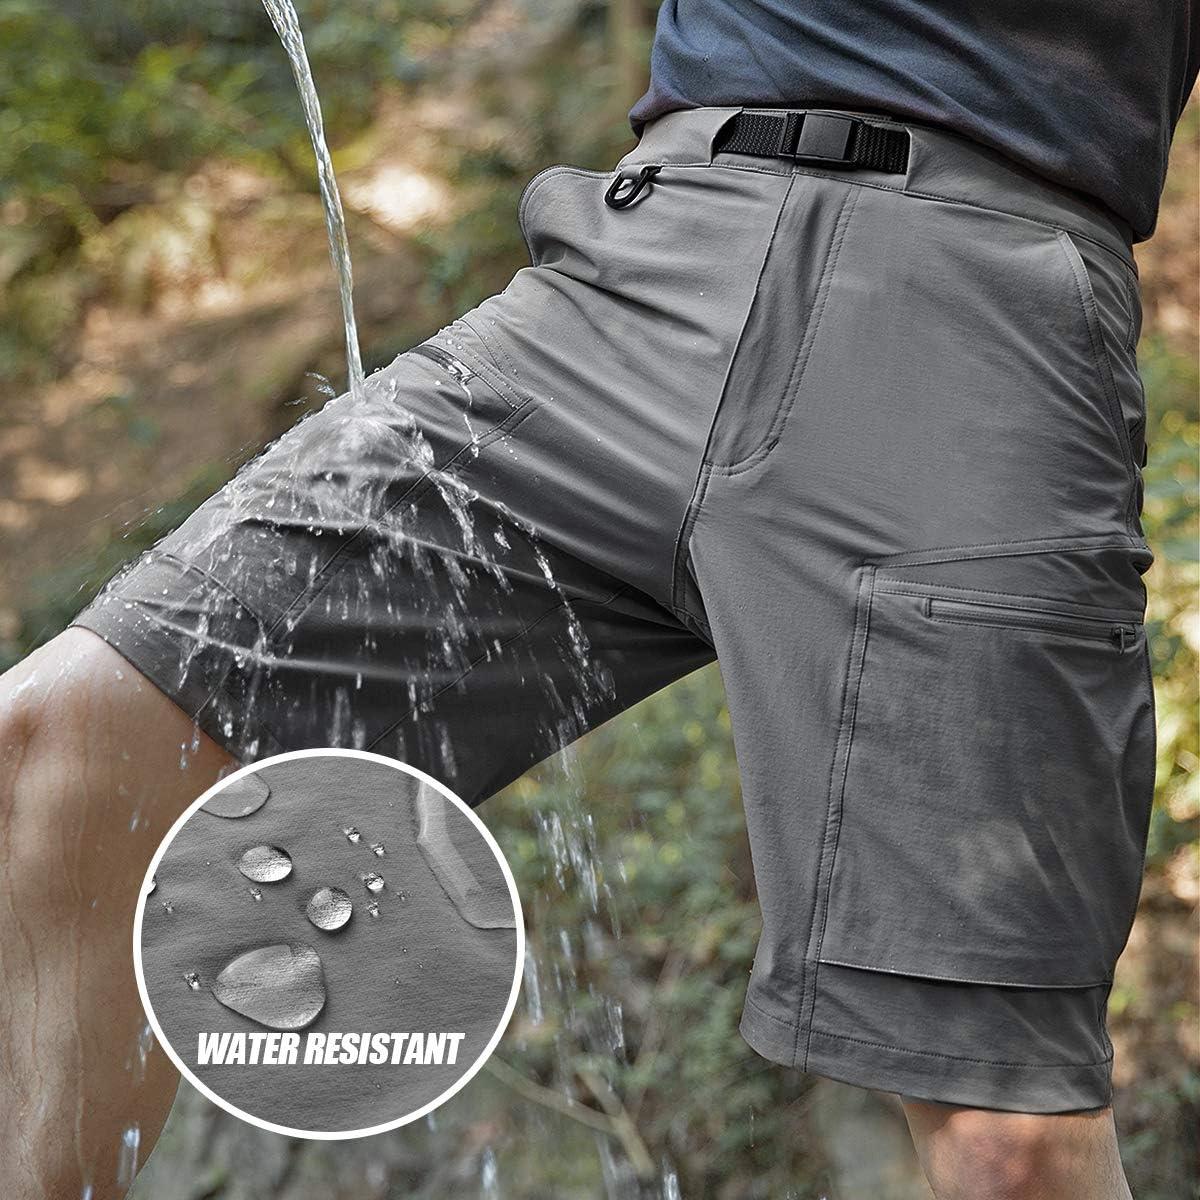 FREE SOLDIER Men's Cargo Shorts with Belt Lightweight Breathable